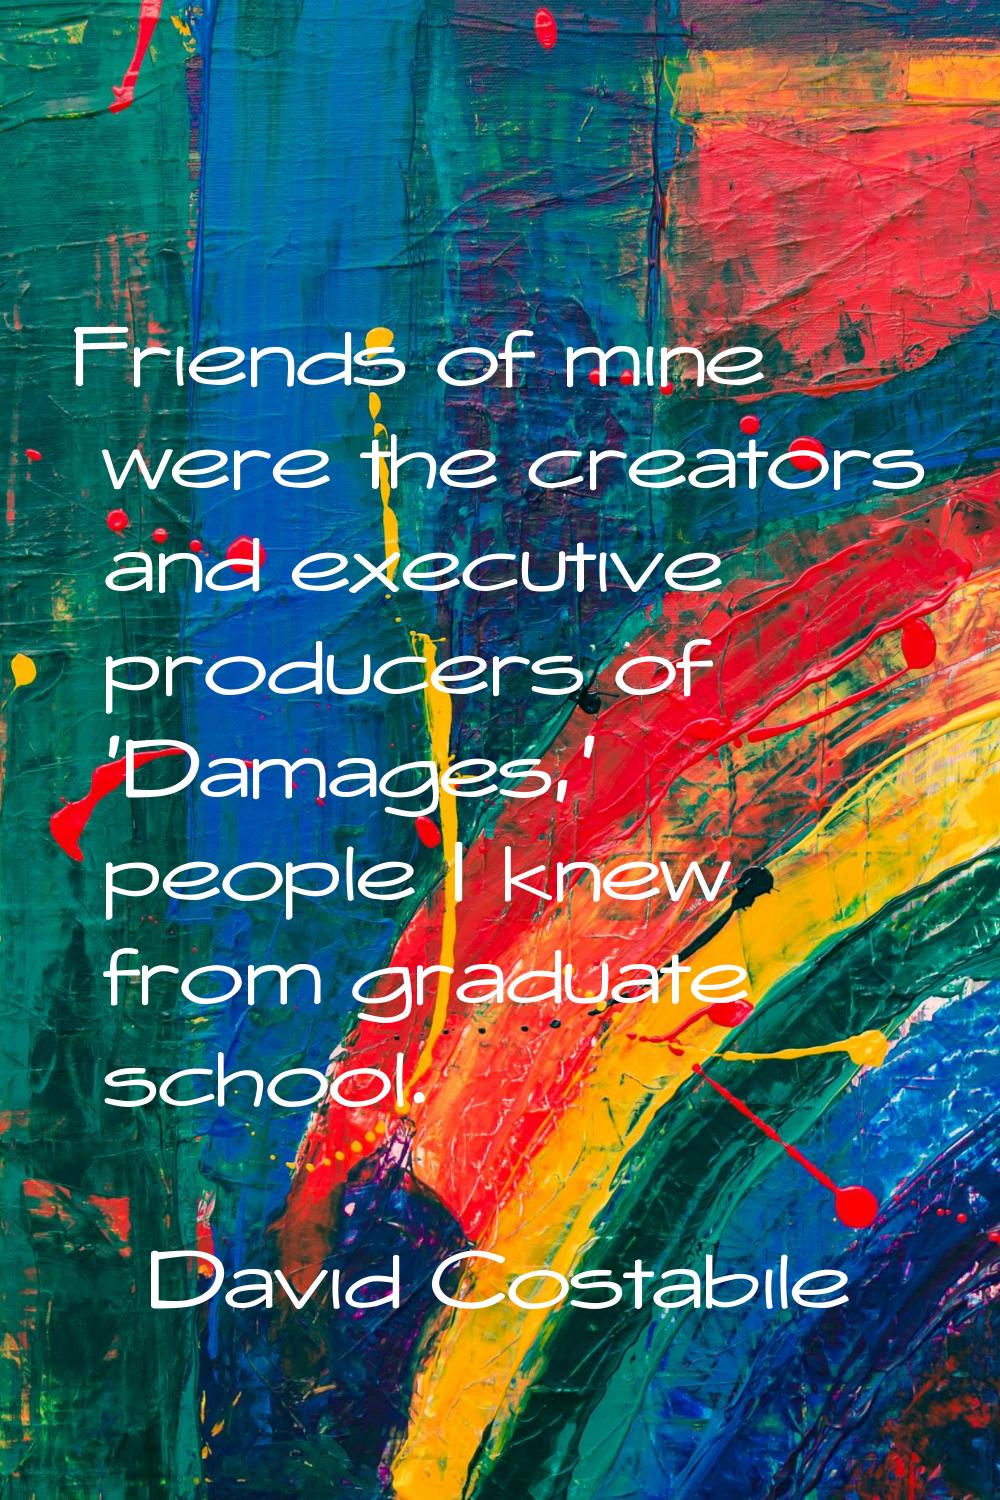 Friends of mine were the creators and executive producers of 'Damages,' people I knew from graduate